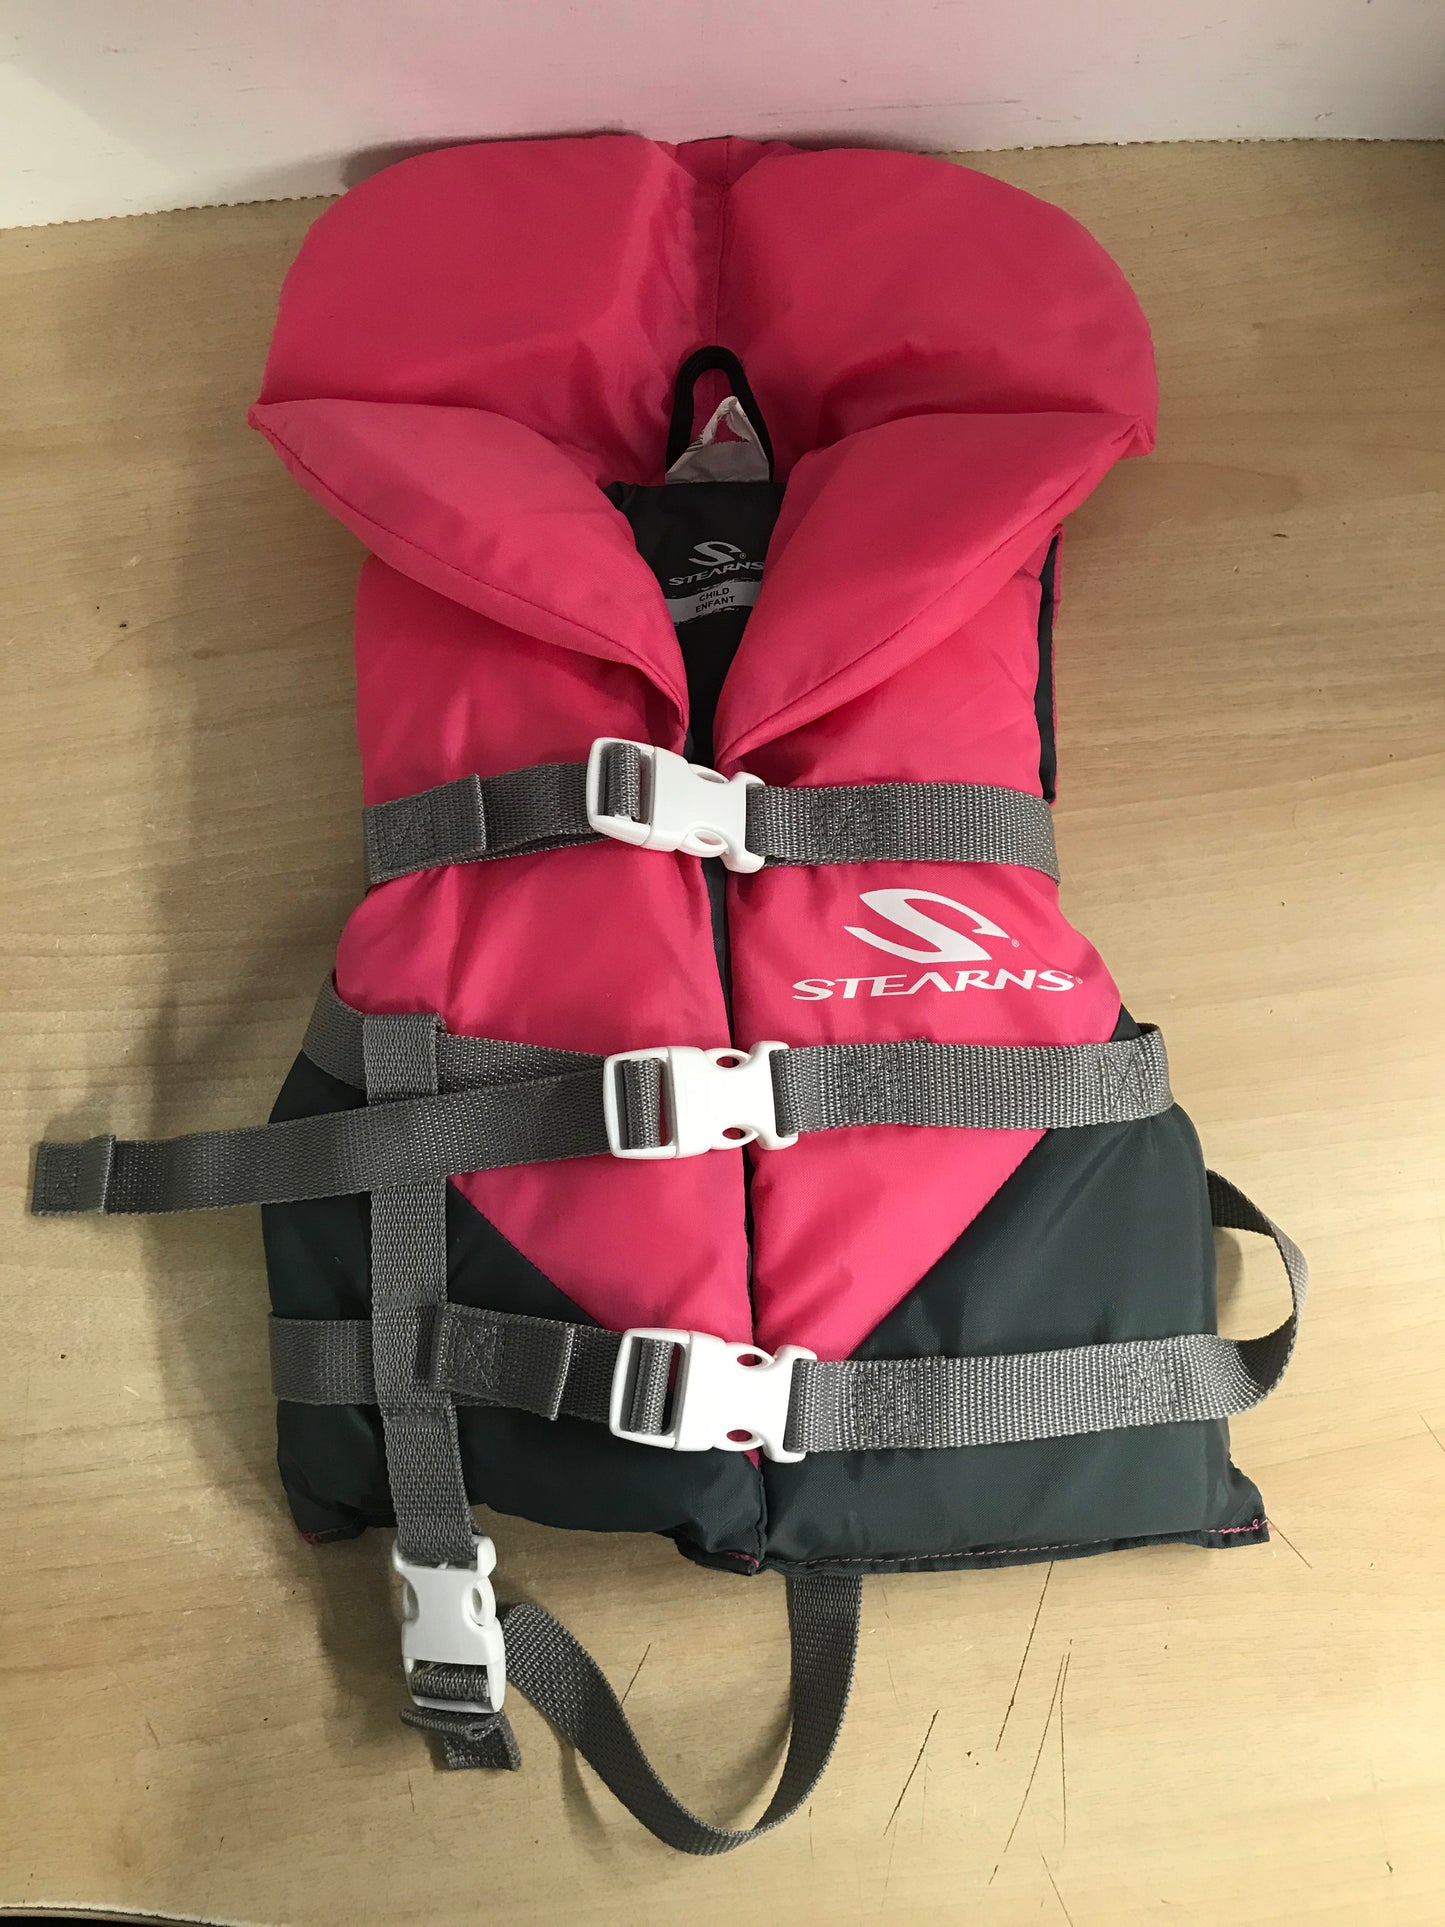 Life Jacket Child Size 30-60 Lb Stearns Pink Grey As New